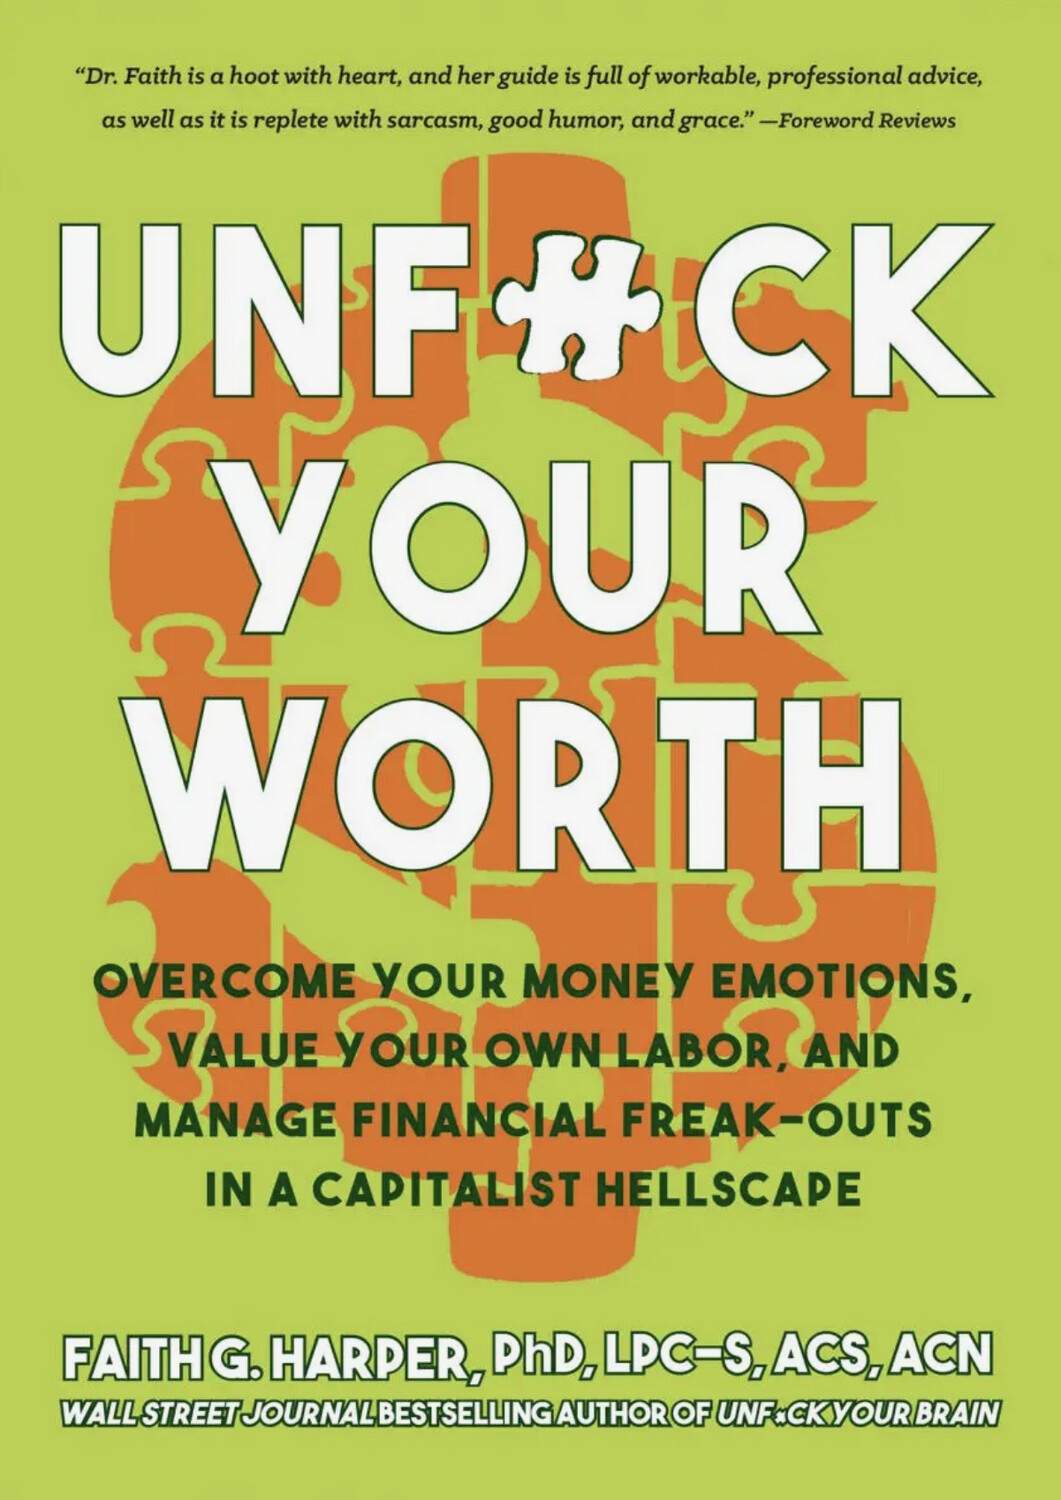 Unfuck Your Worth - Book by Dr. Faith G. Harper